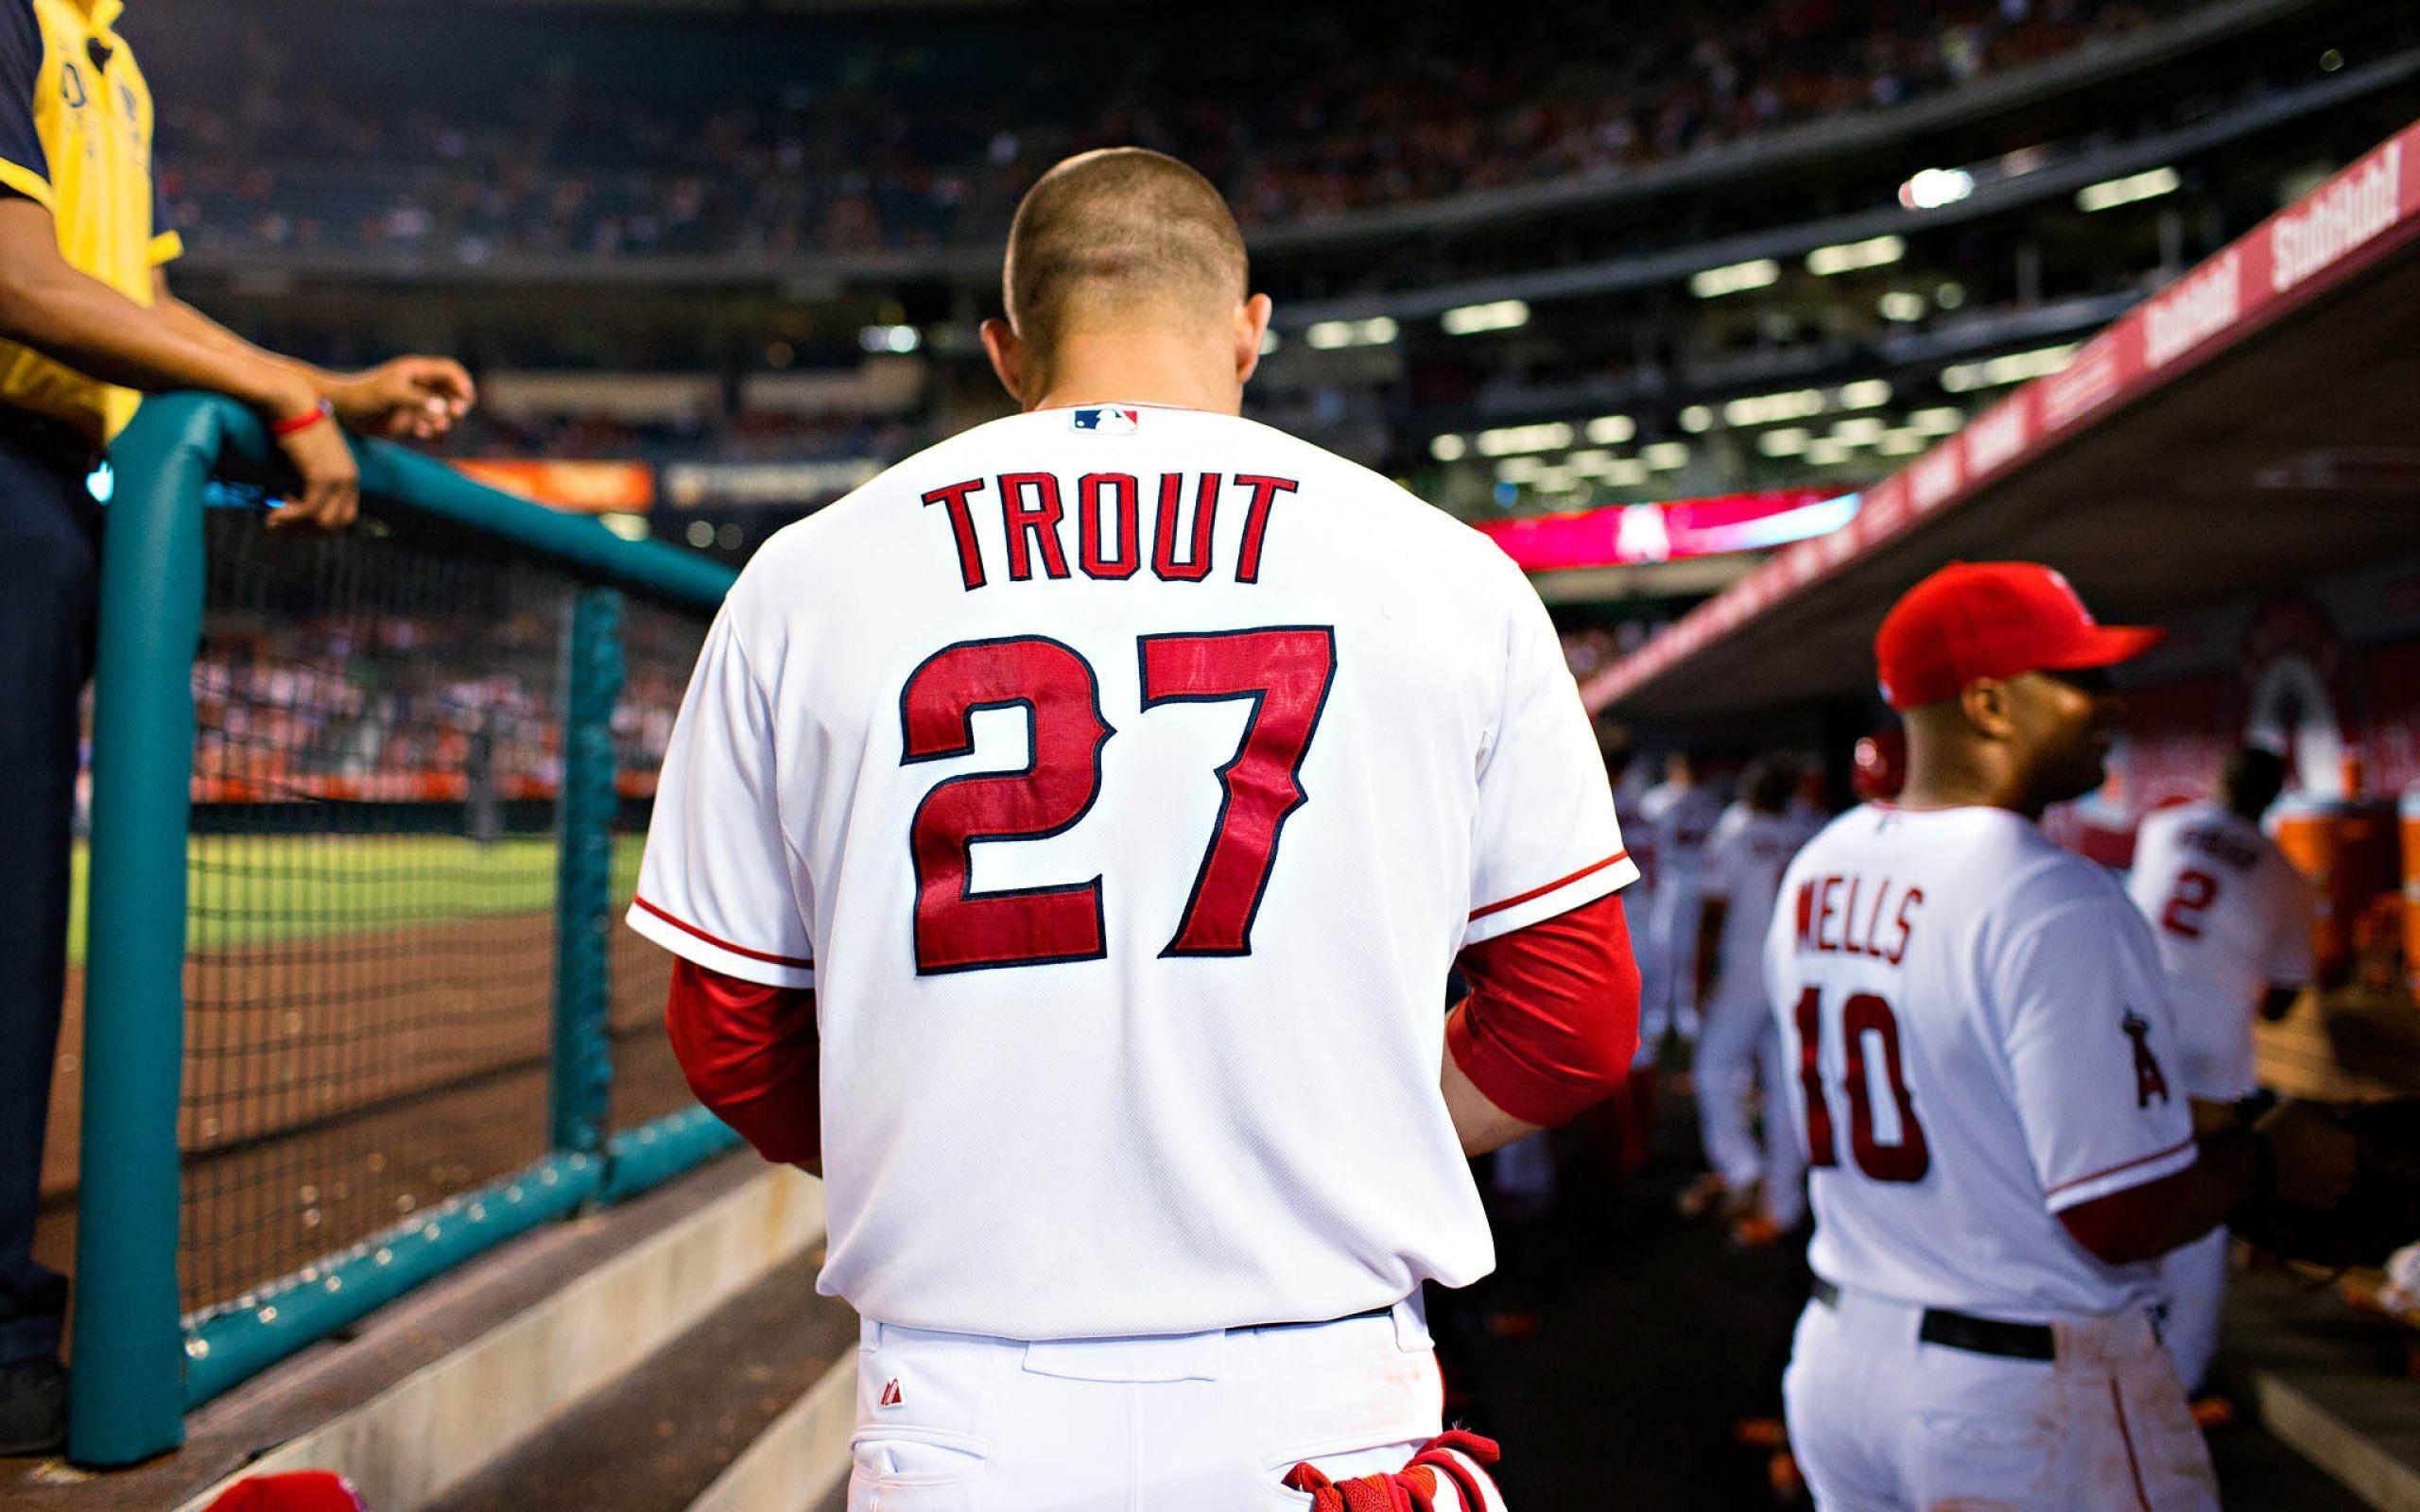 Download Wallpapers 2560x1600 Mike trout, Baseball, Los angeles